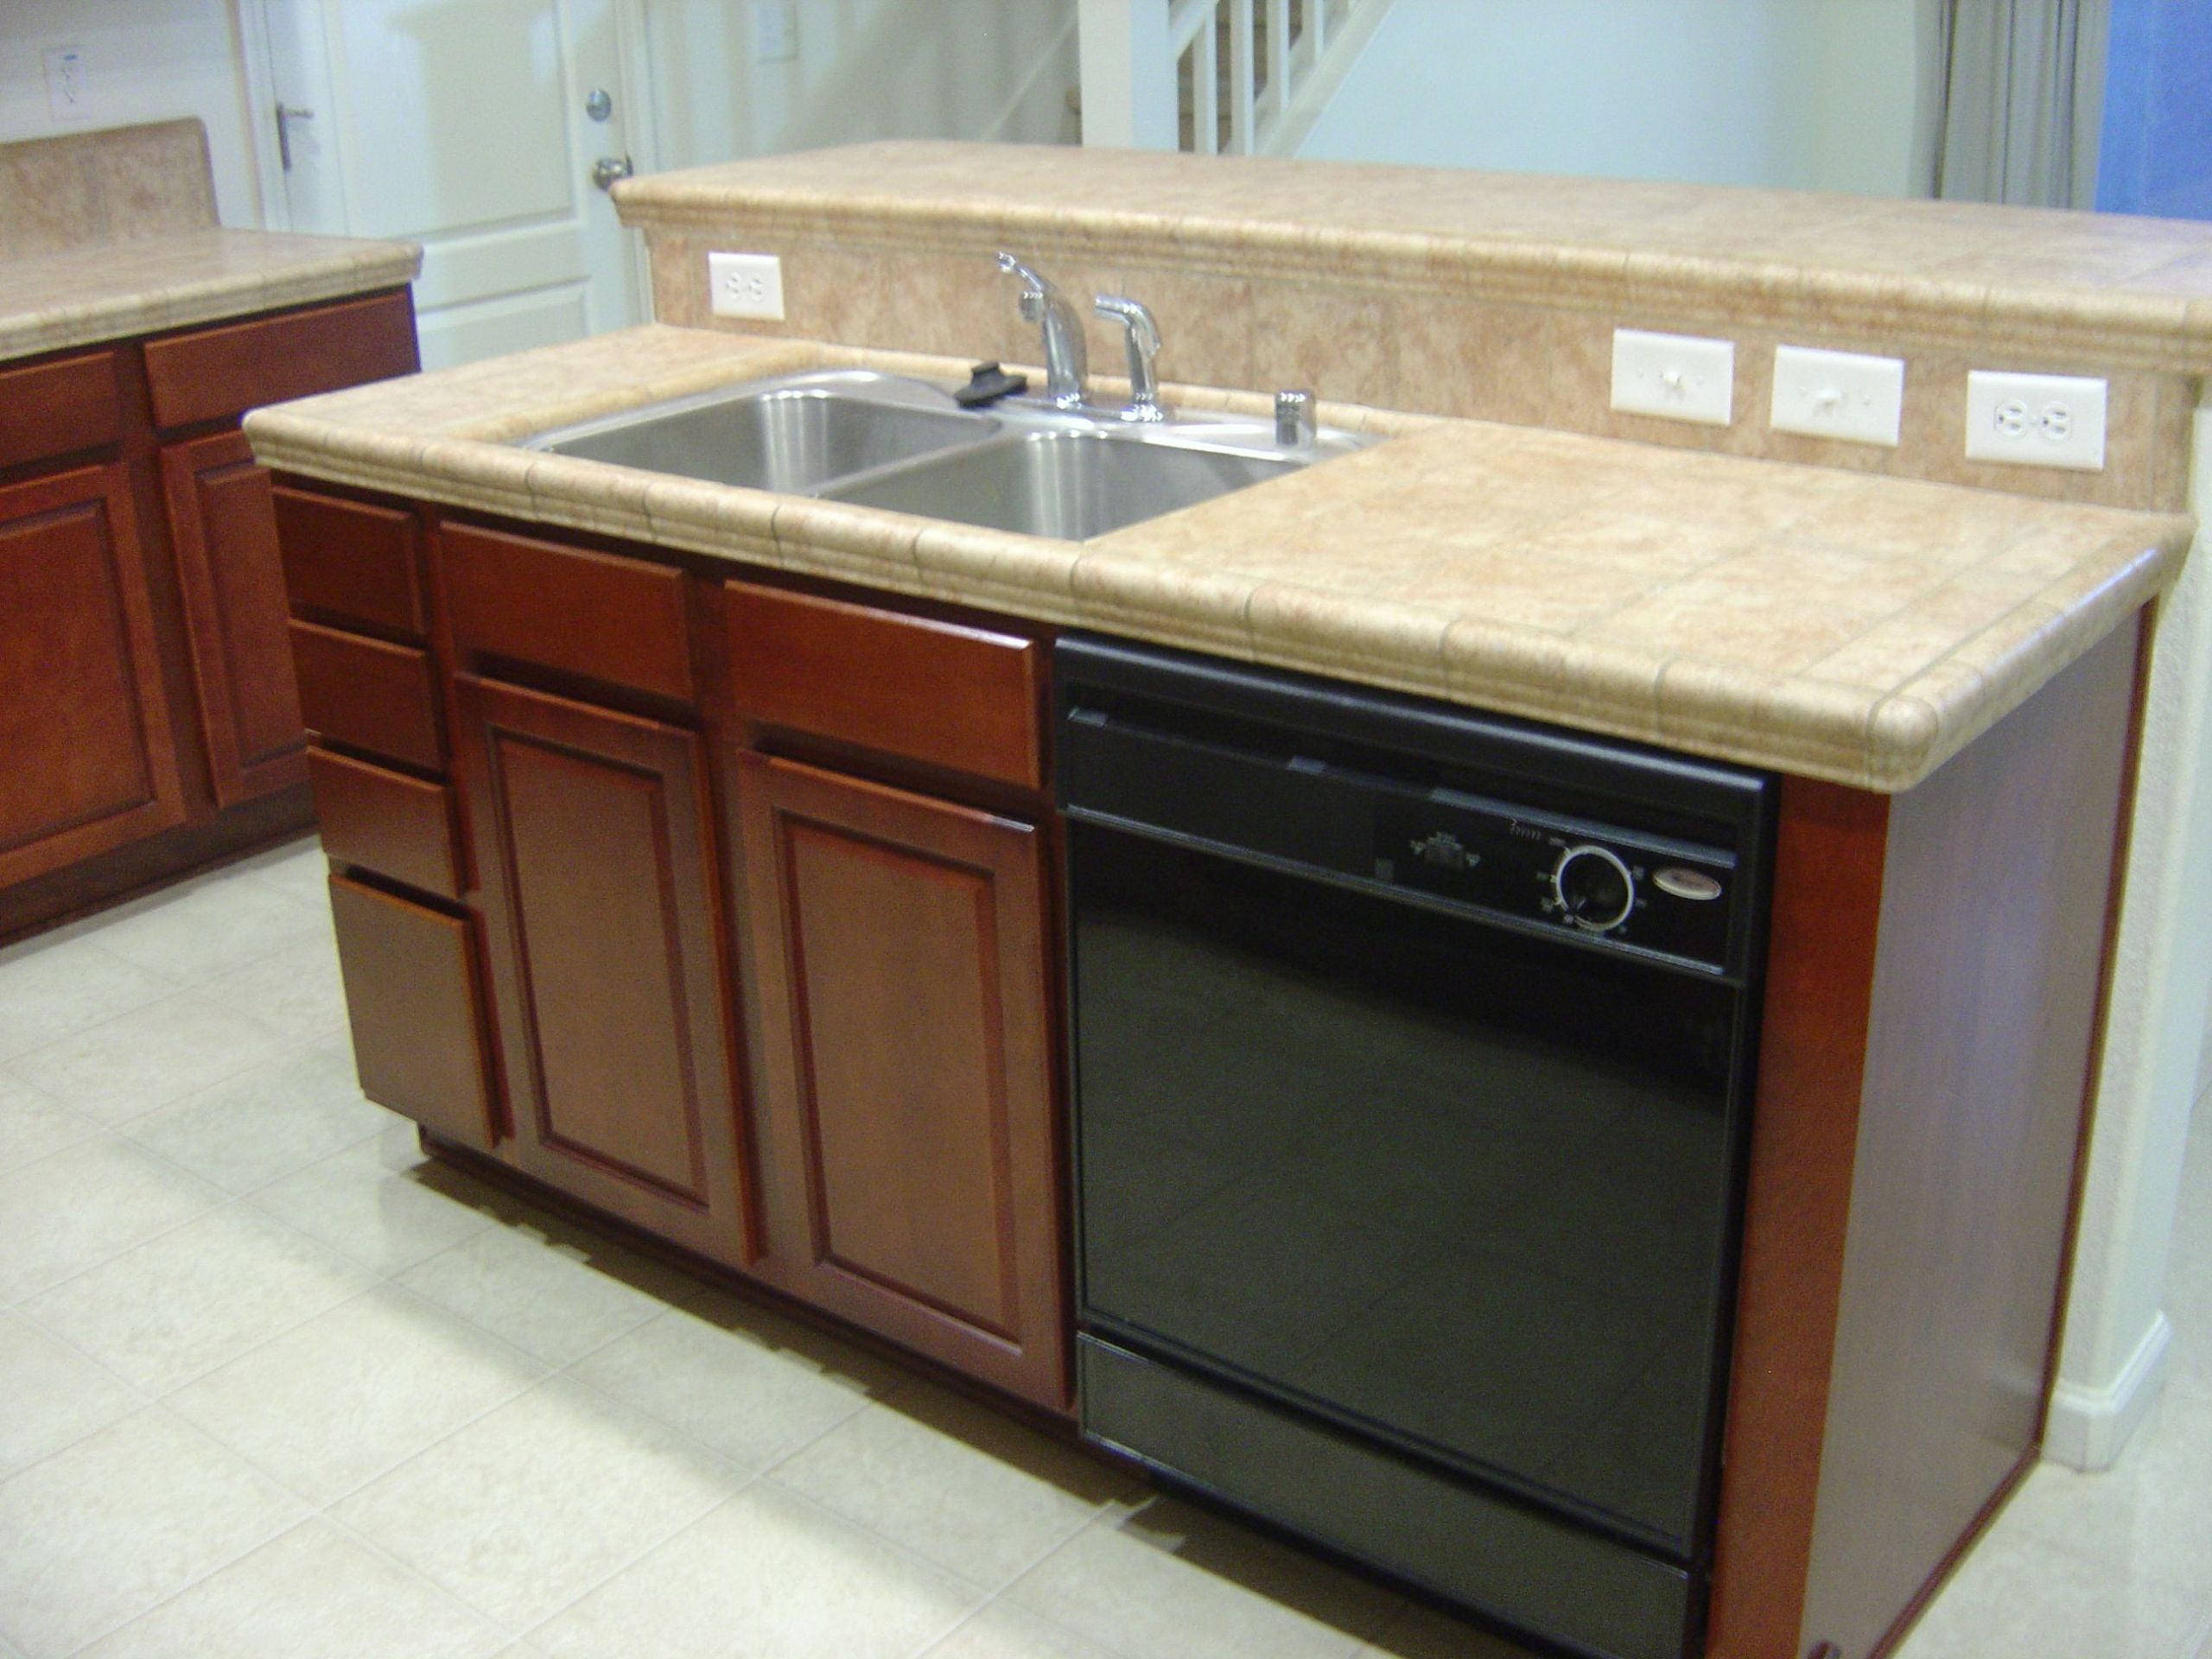 Small Kitchen Island With Sink
 The Possibilities of Storage under Kitchen Islands with